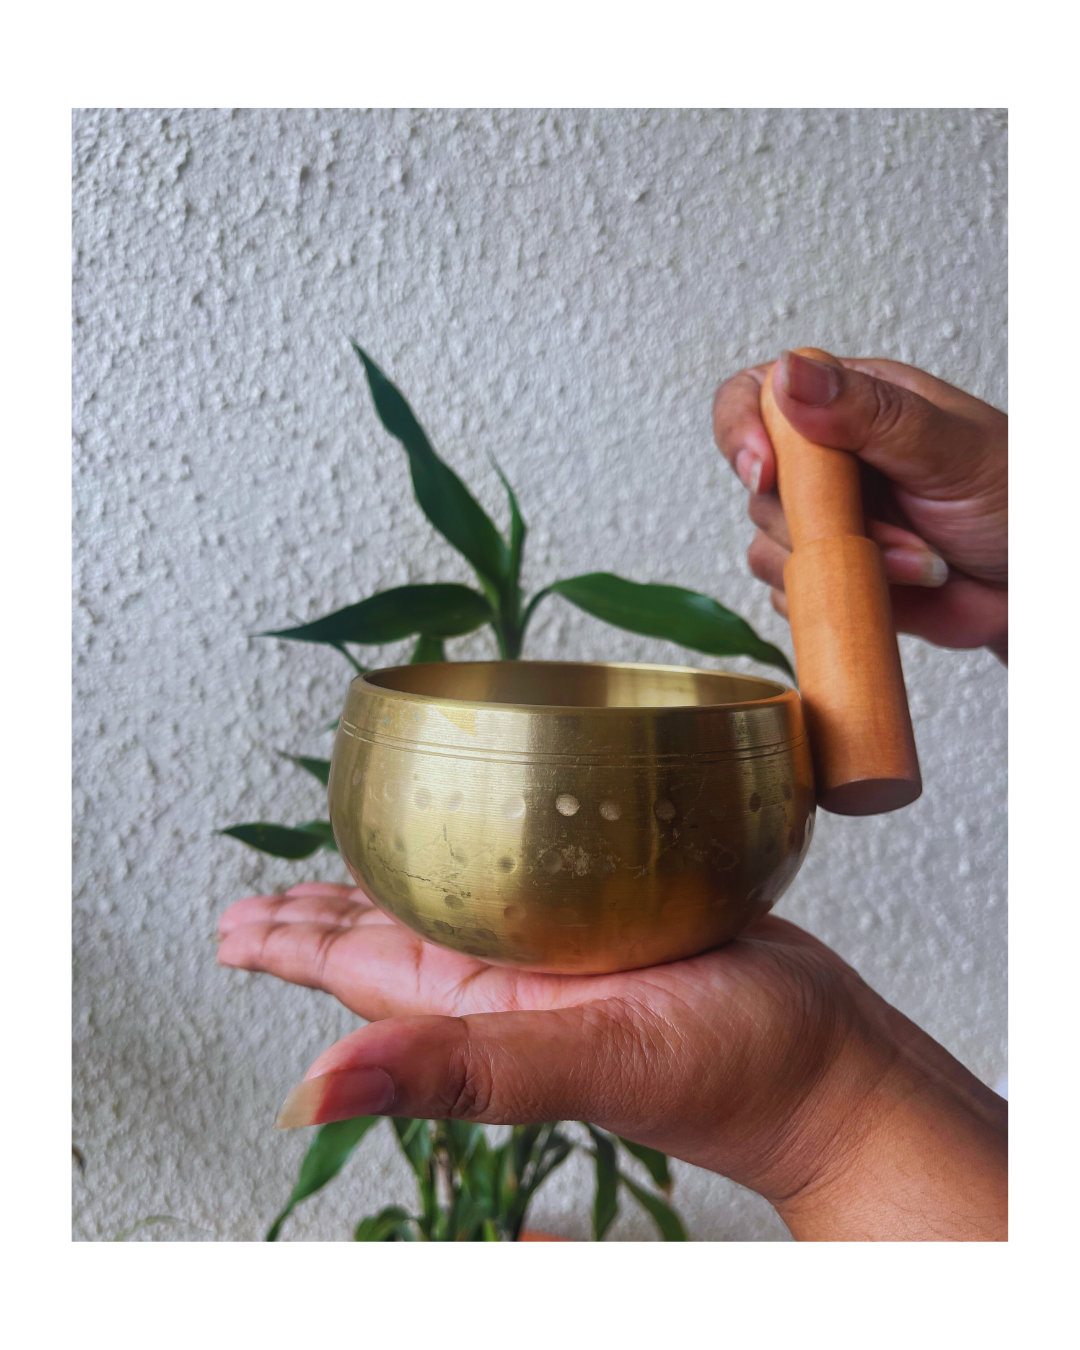 Singing Bowl - 5-metal Panchaloha Hand-hammered Bowl (4 inch) with Wooden Mallet